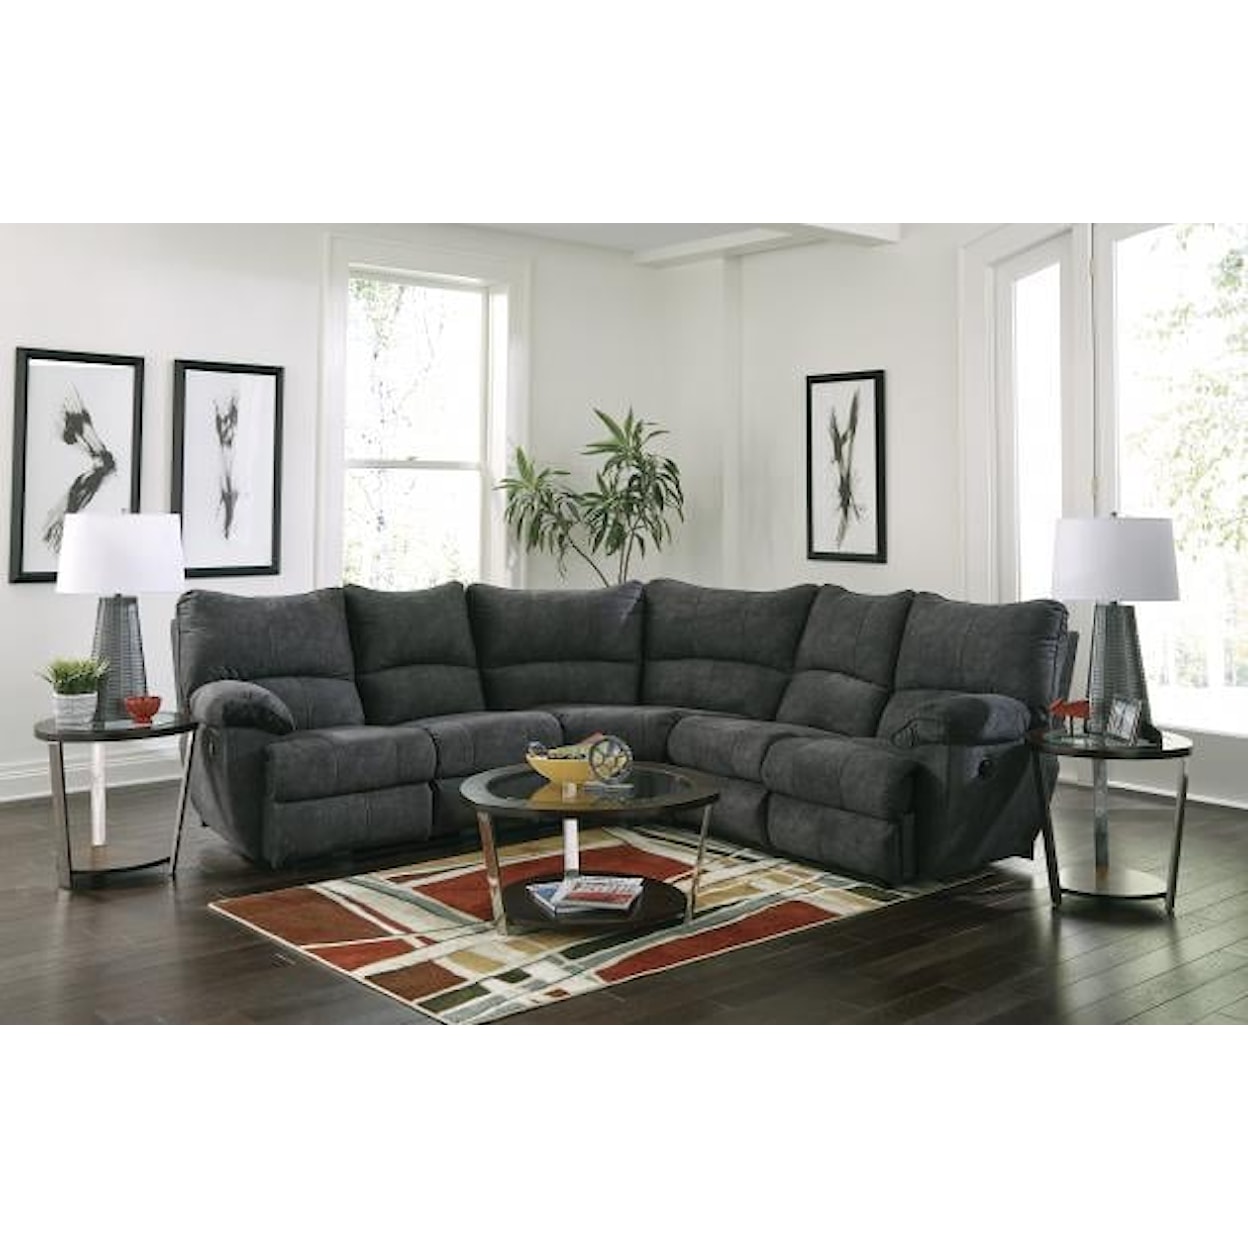 Catnapper 135 Shane Sectional L-Shaped Lay Flat Sectional